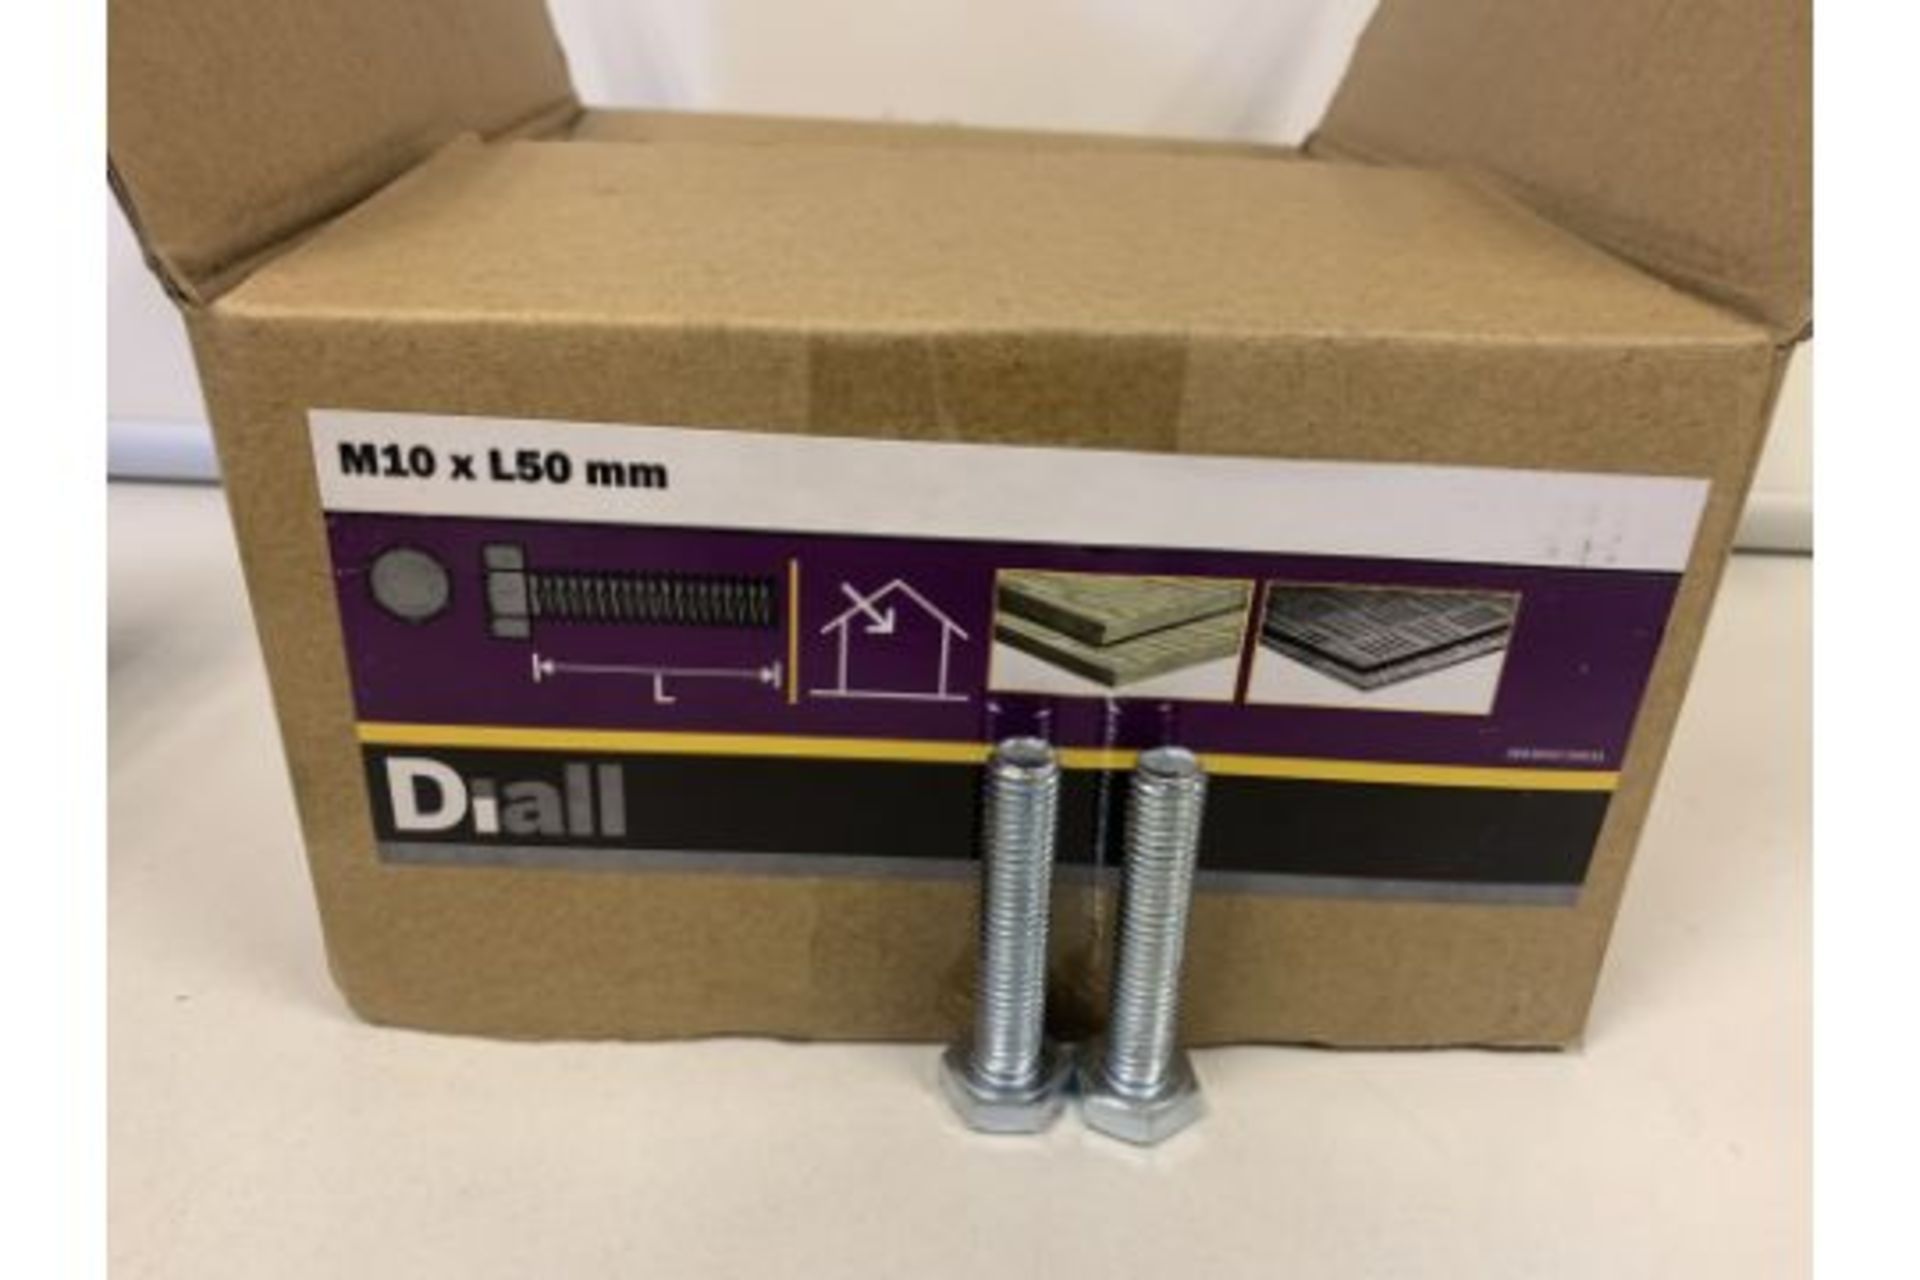 20 X 4KG BOXES OF DIALL M10 X L50MM HEX BOLTS LOOSE (786/13)